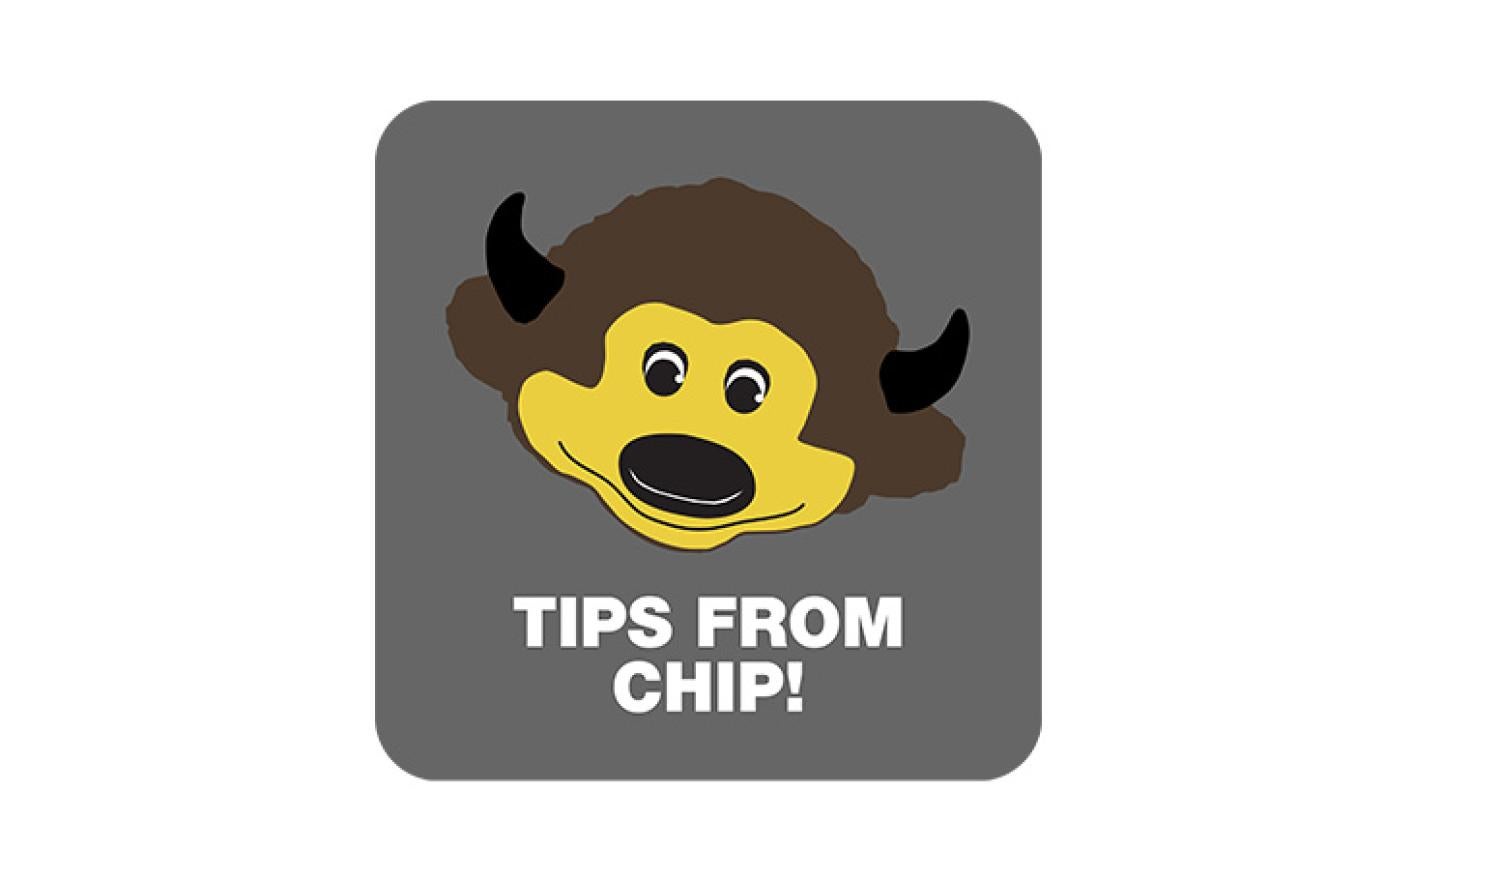 Chip tips